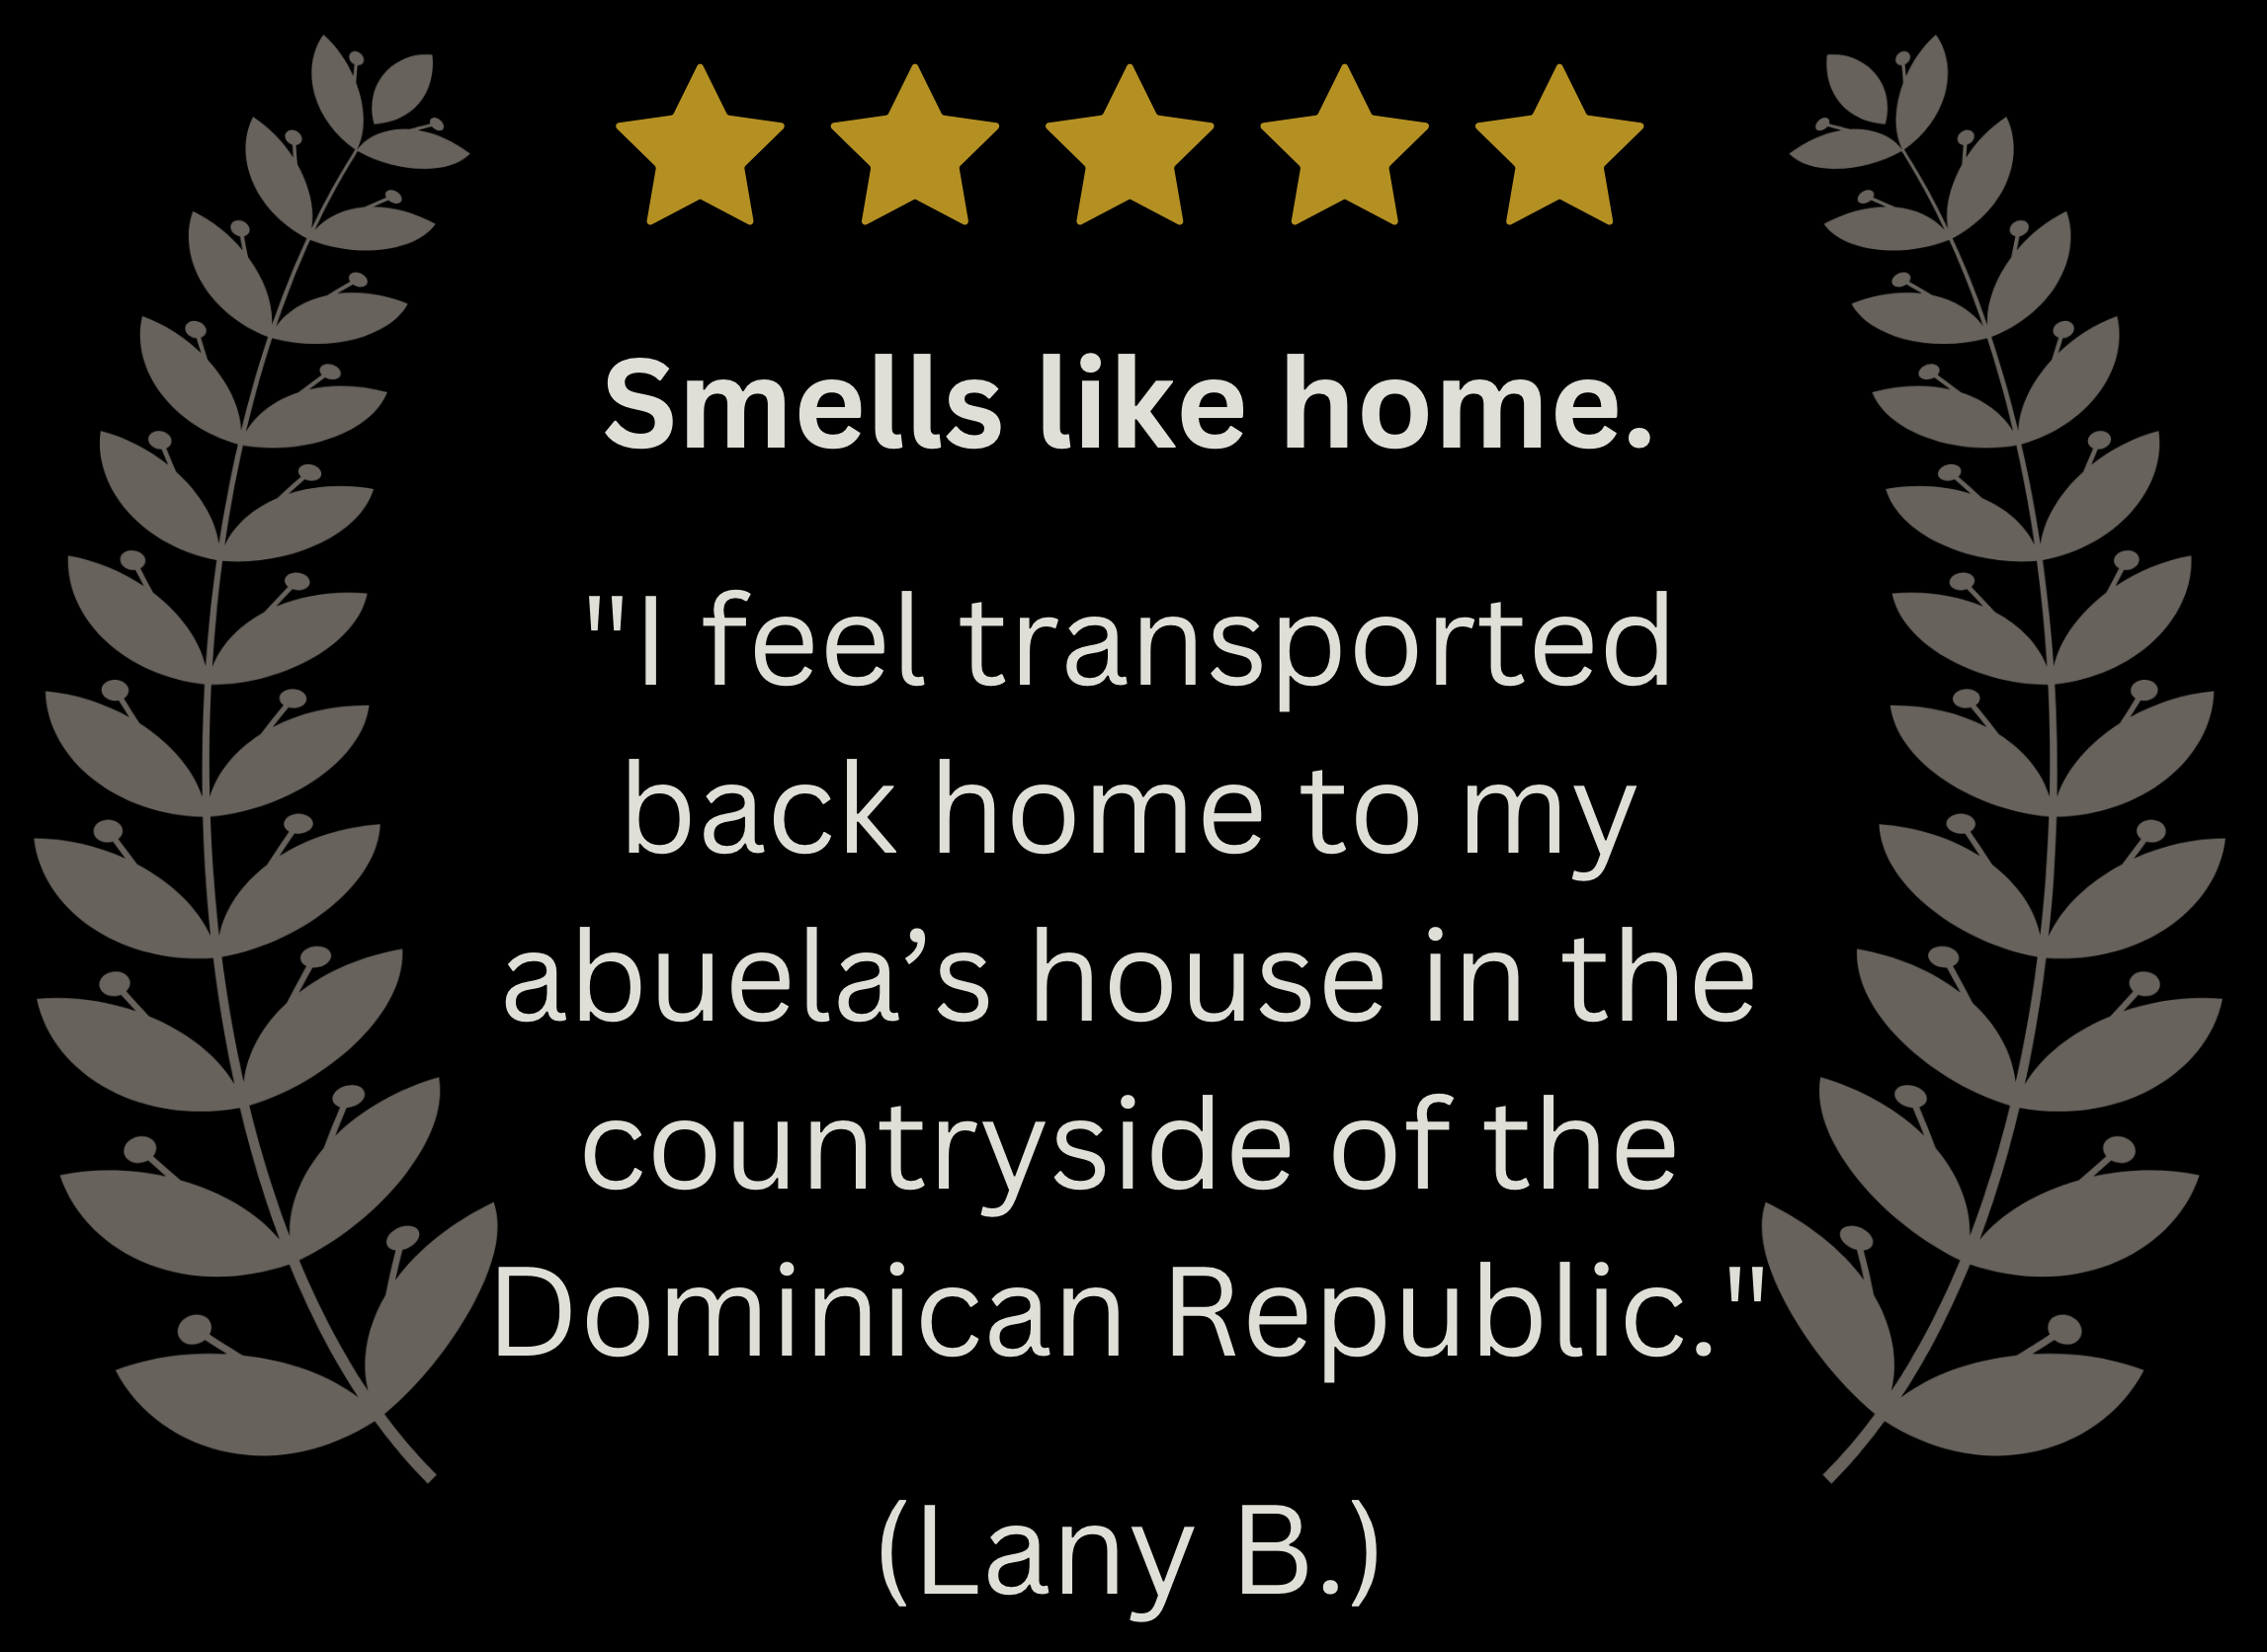 5-star review from Lany B. stating, "Smells like home. I feel transported back home to my abuela's house in the countryside of he Dominican Republic."